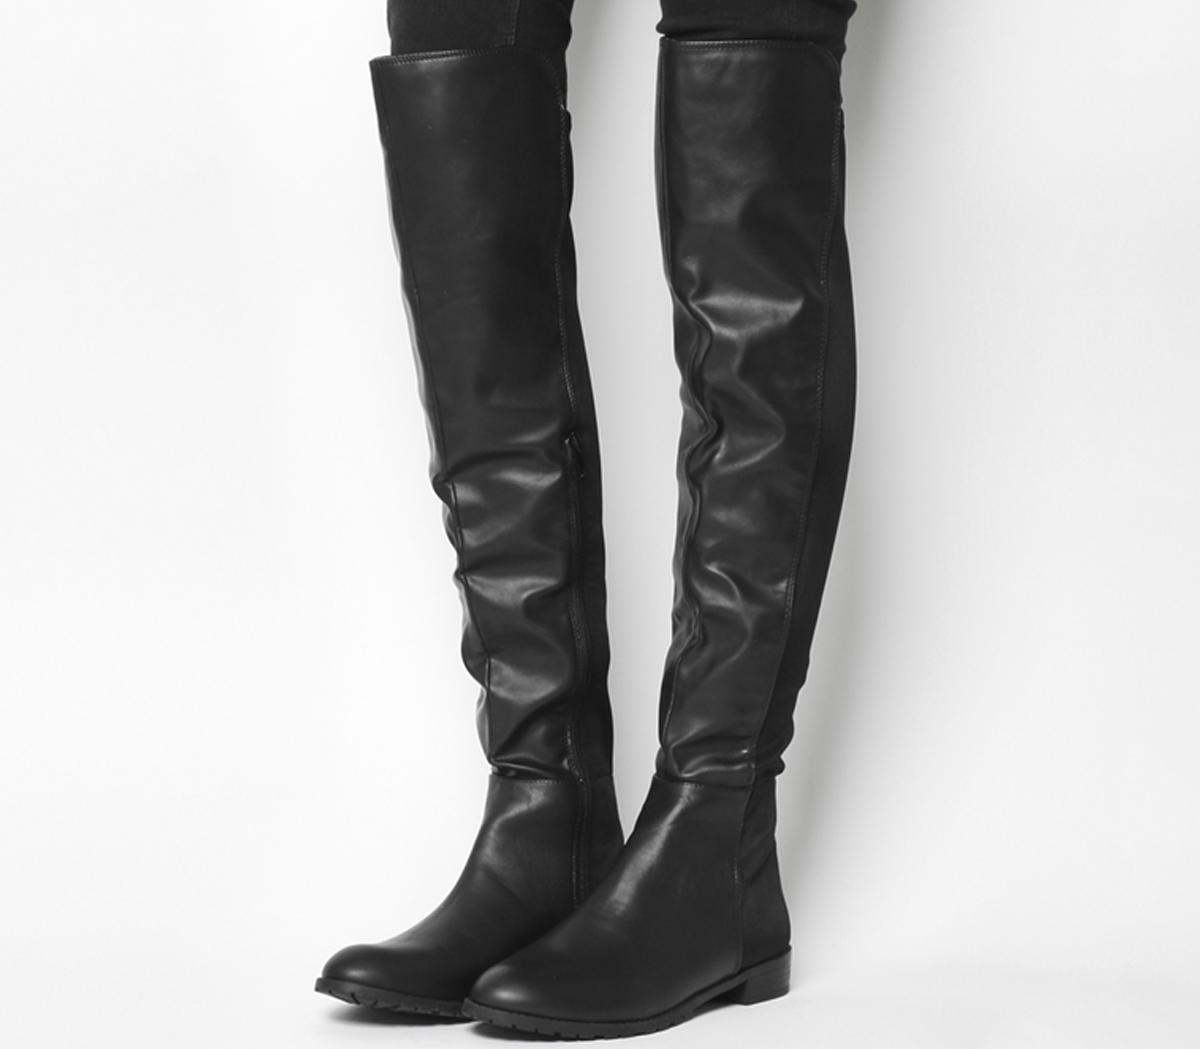 Office Kiwi Flat Over The Knee Boots Black Knee High Boots